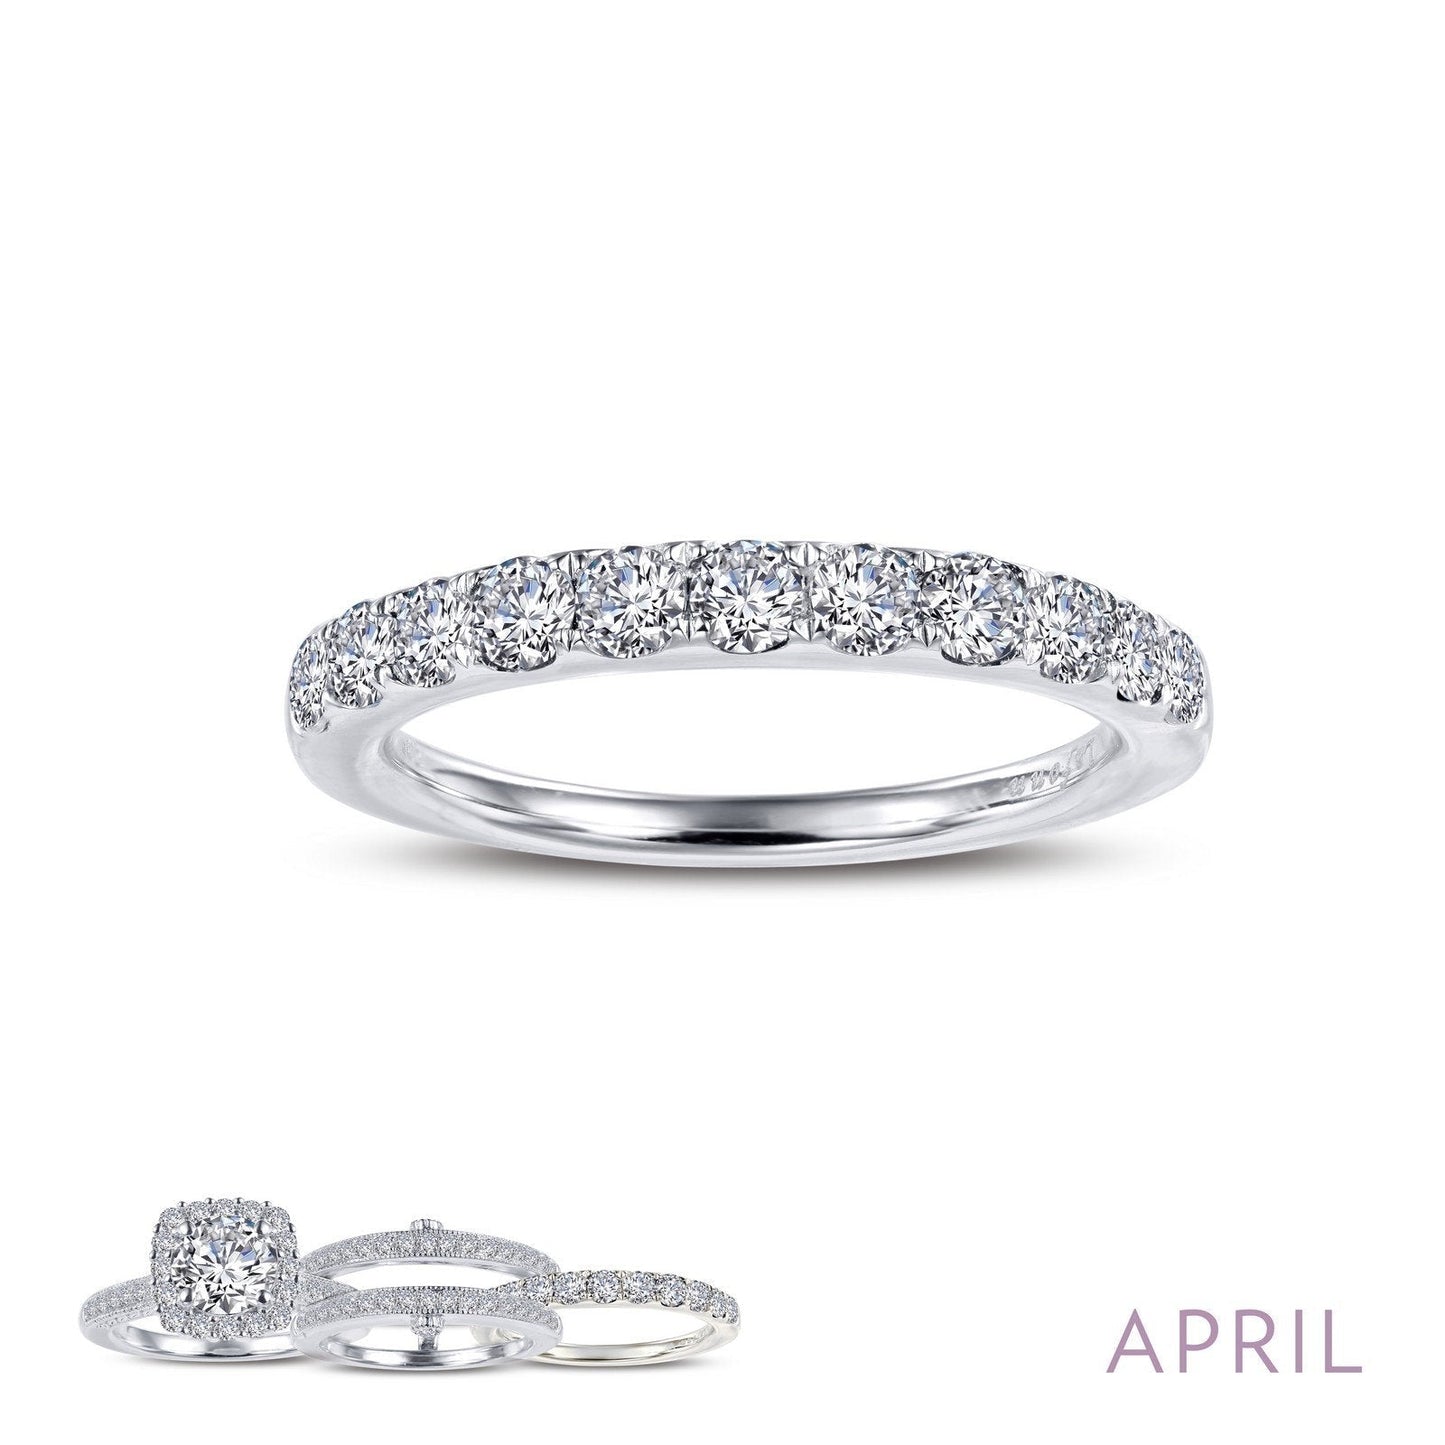 Load image into Gallery viewer, Lafonn April Birthstone Ring APRIL RINGS Size 9 Platinum 0.51cts CTS Approx.2.7mm(W)
